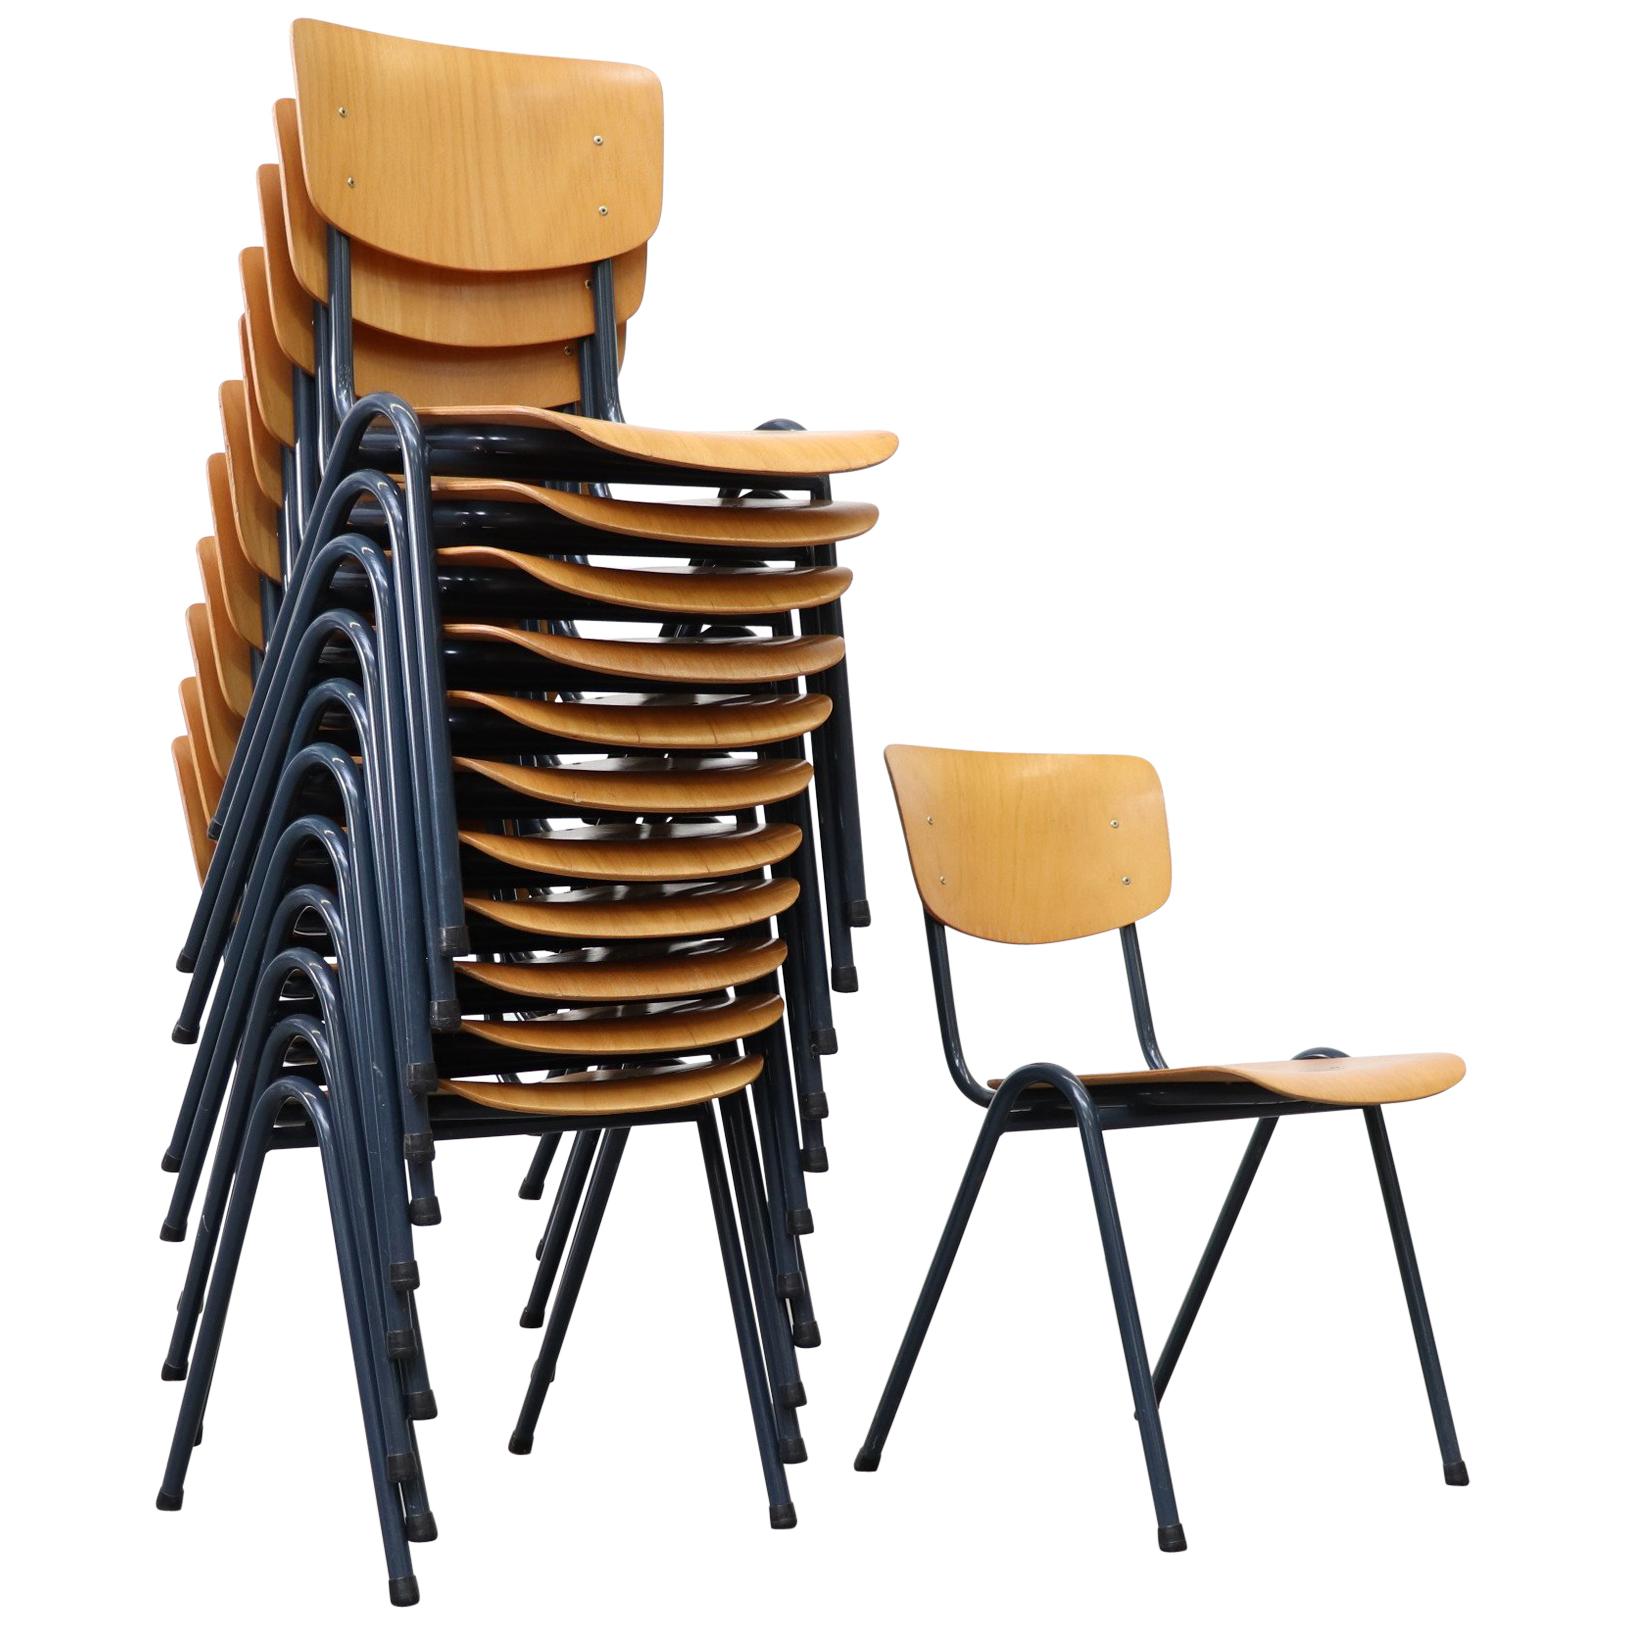 Set of 6 Blonde Plywood Industrial Stacking Chairs with Blue-Grey Enameled Metal